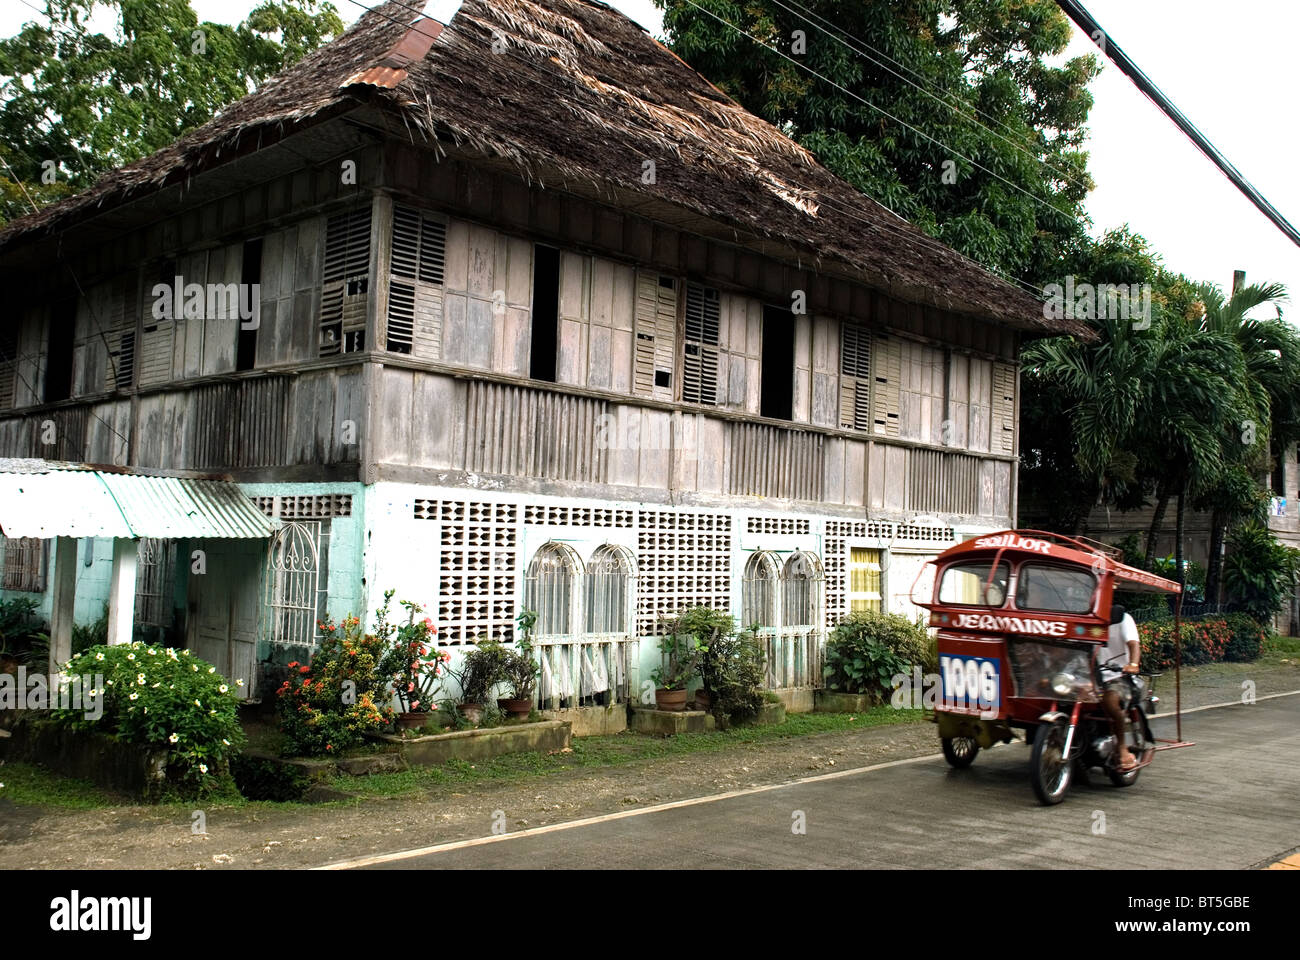 philippines, siquijor island, siquijor town, old timber house with tricycle Stock Photo